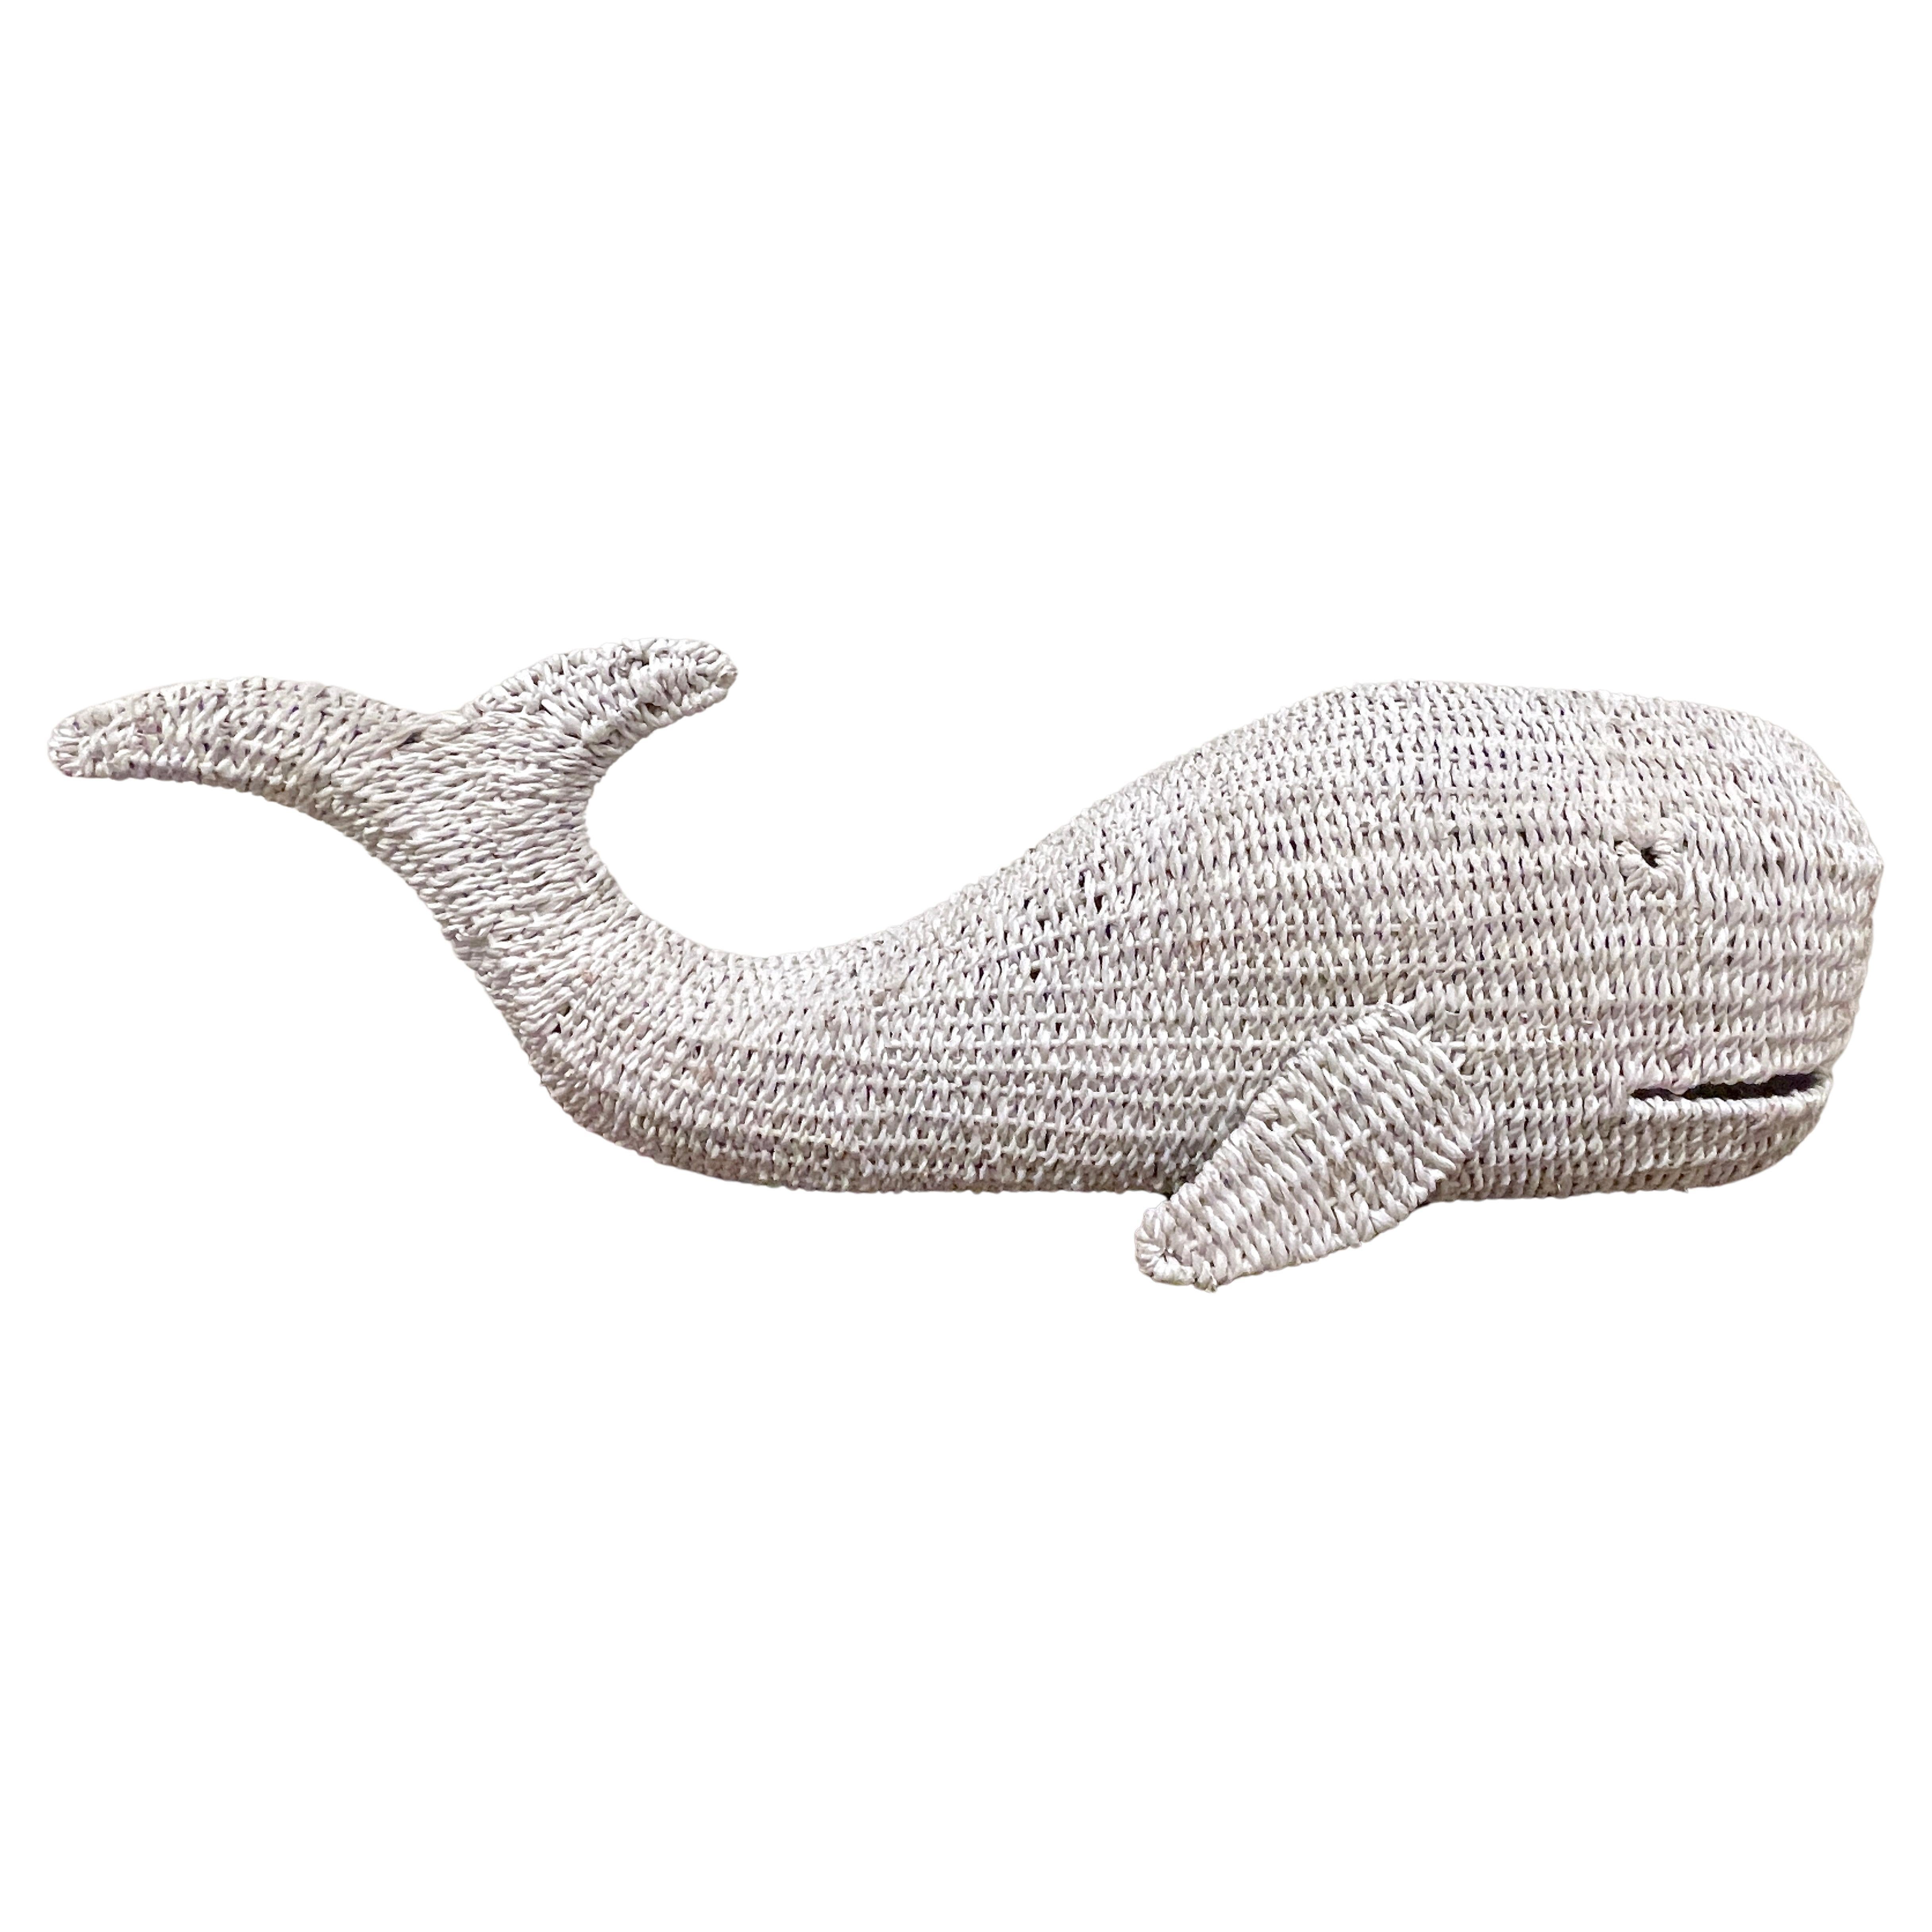 1970s Vintage  'Nantucket' White Wicker Sculpture of a Whale 
Italy, circa 1970s
A unique 1970s Vintage 'Nantucket' White Wicker Sculpture of a Whale, from Italy and beautifully crafted during the 1970s. This unique piece showcases an elongated and